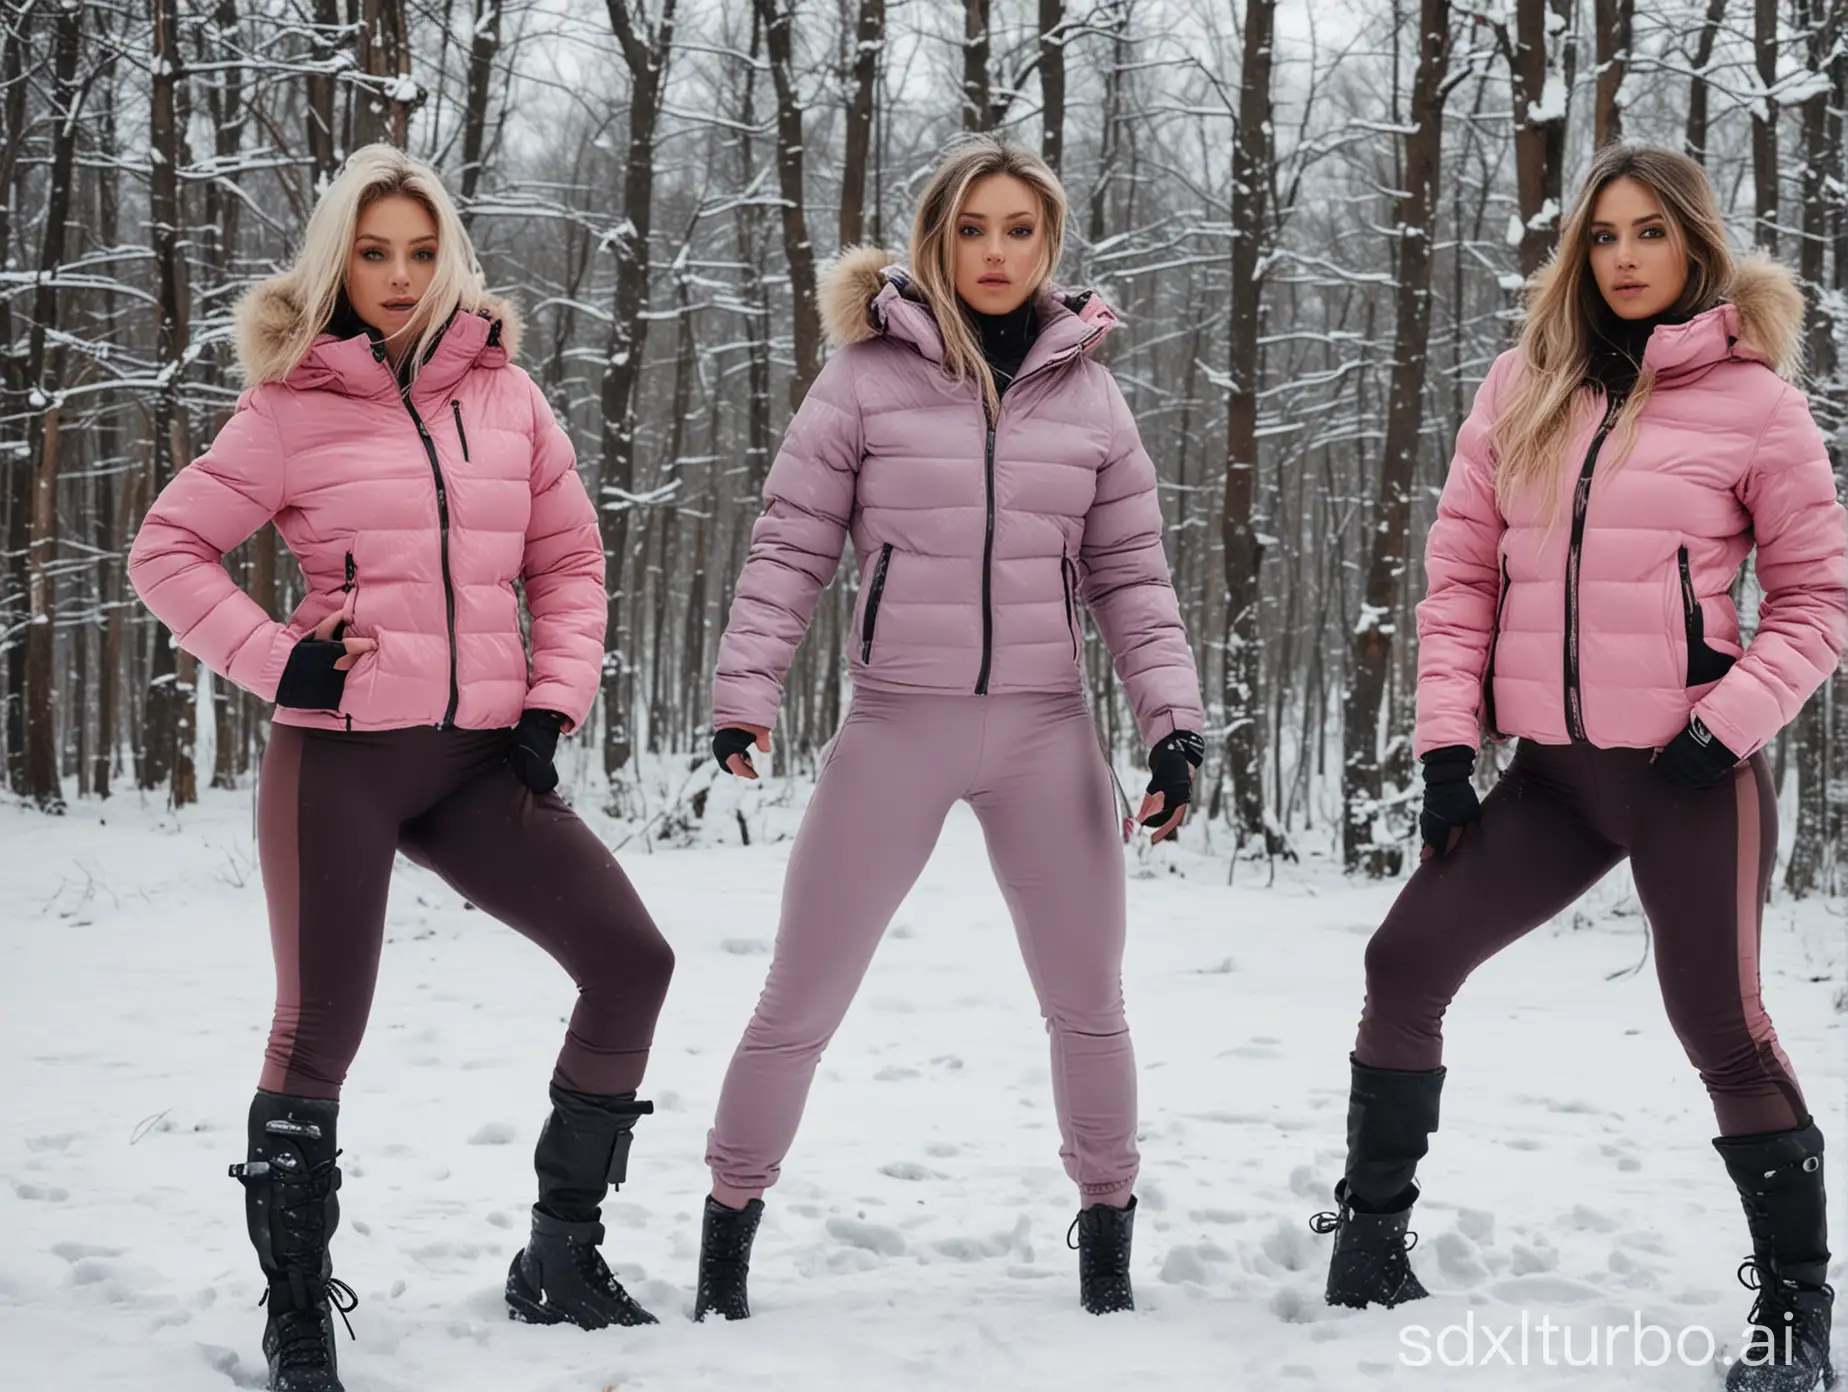 Three-Women-in-Colorful-Down-Jackets-Exercising-in-Snow